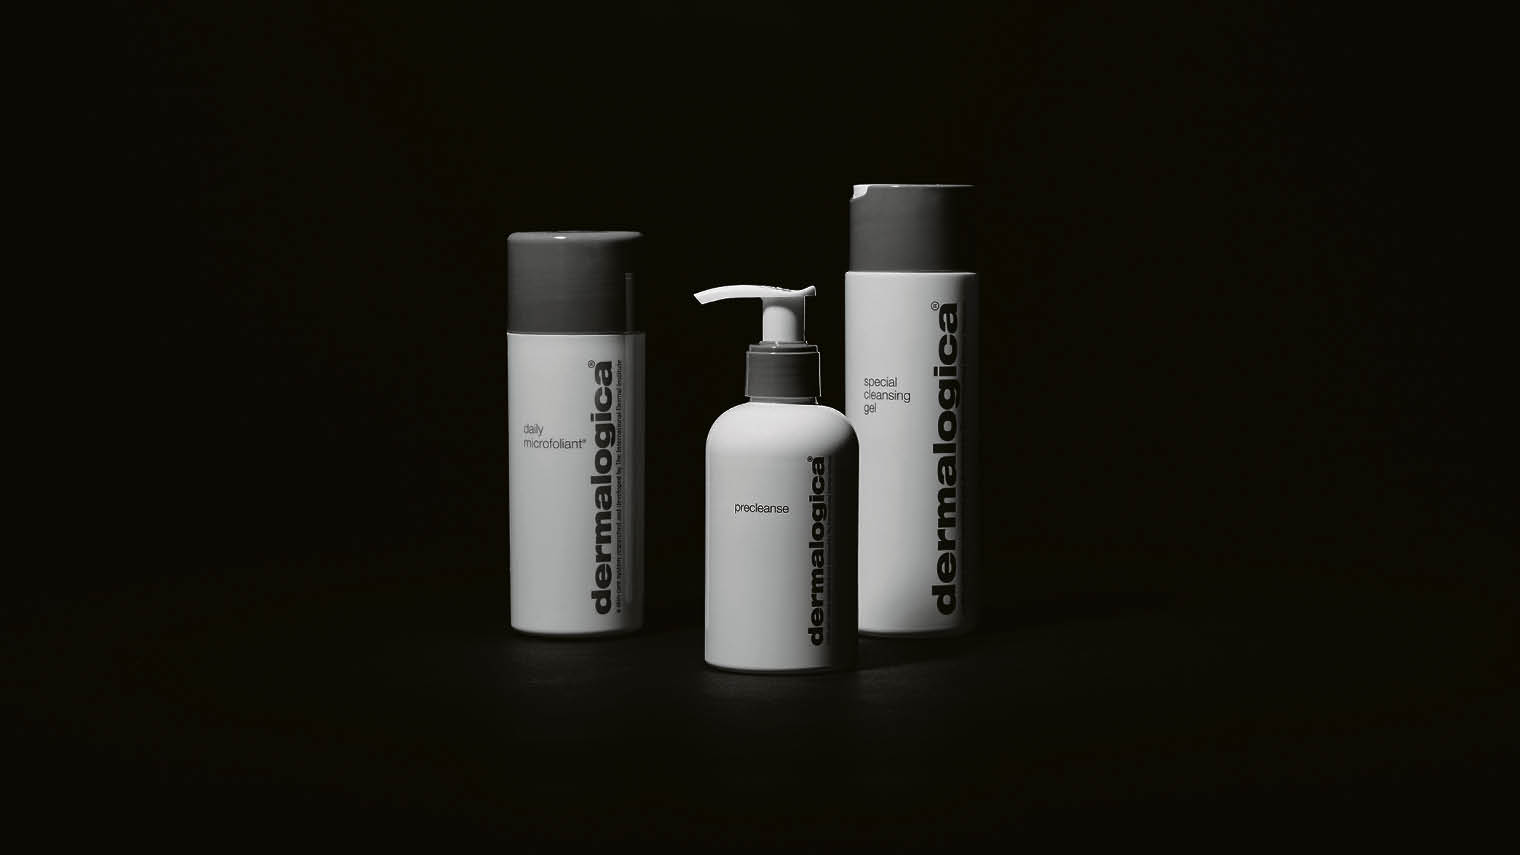 Dermalogica beauty products